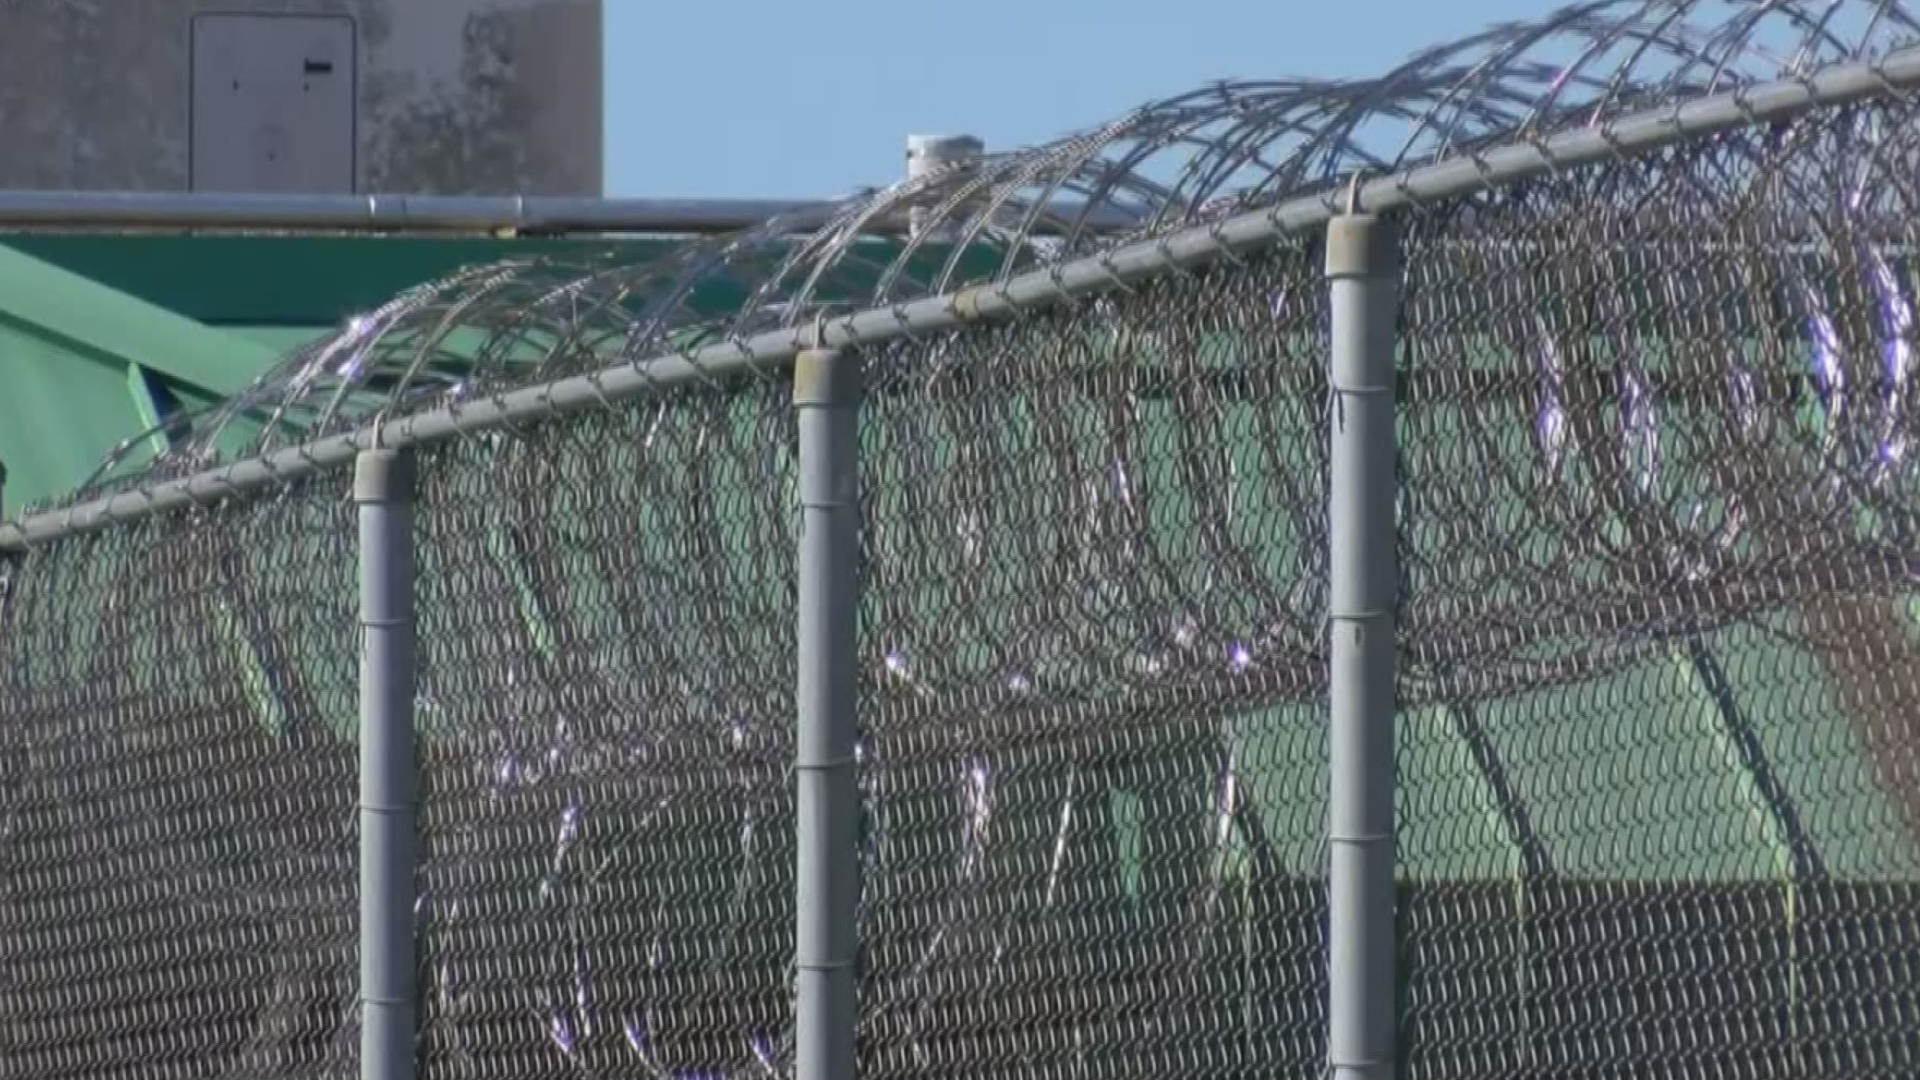 It's nearing a year since seven inmates died and 22 others were injured at Lee Correctional.